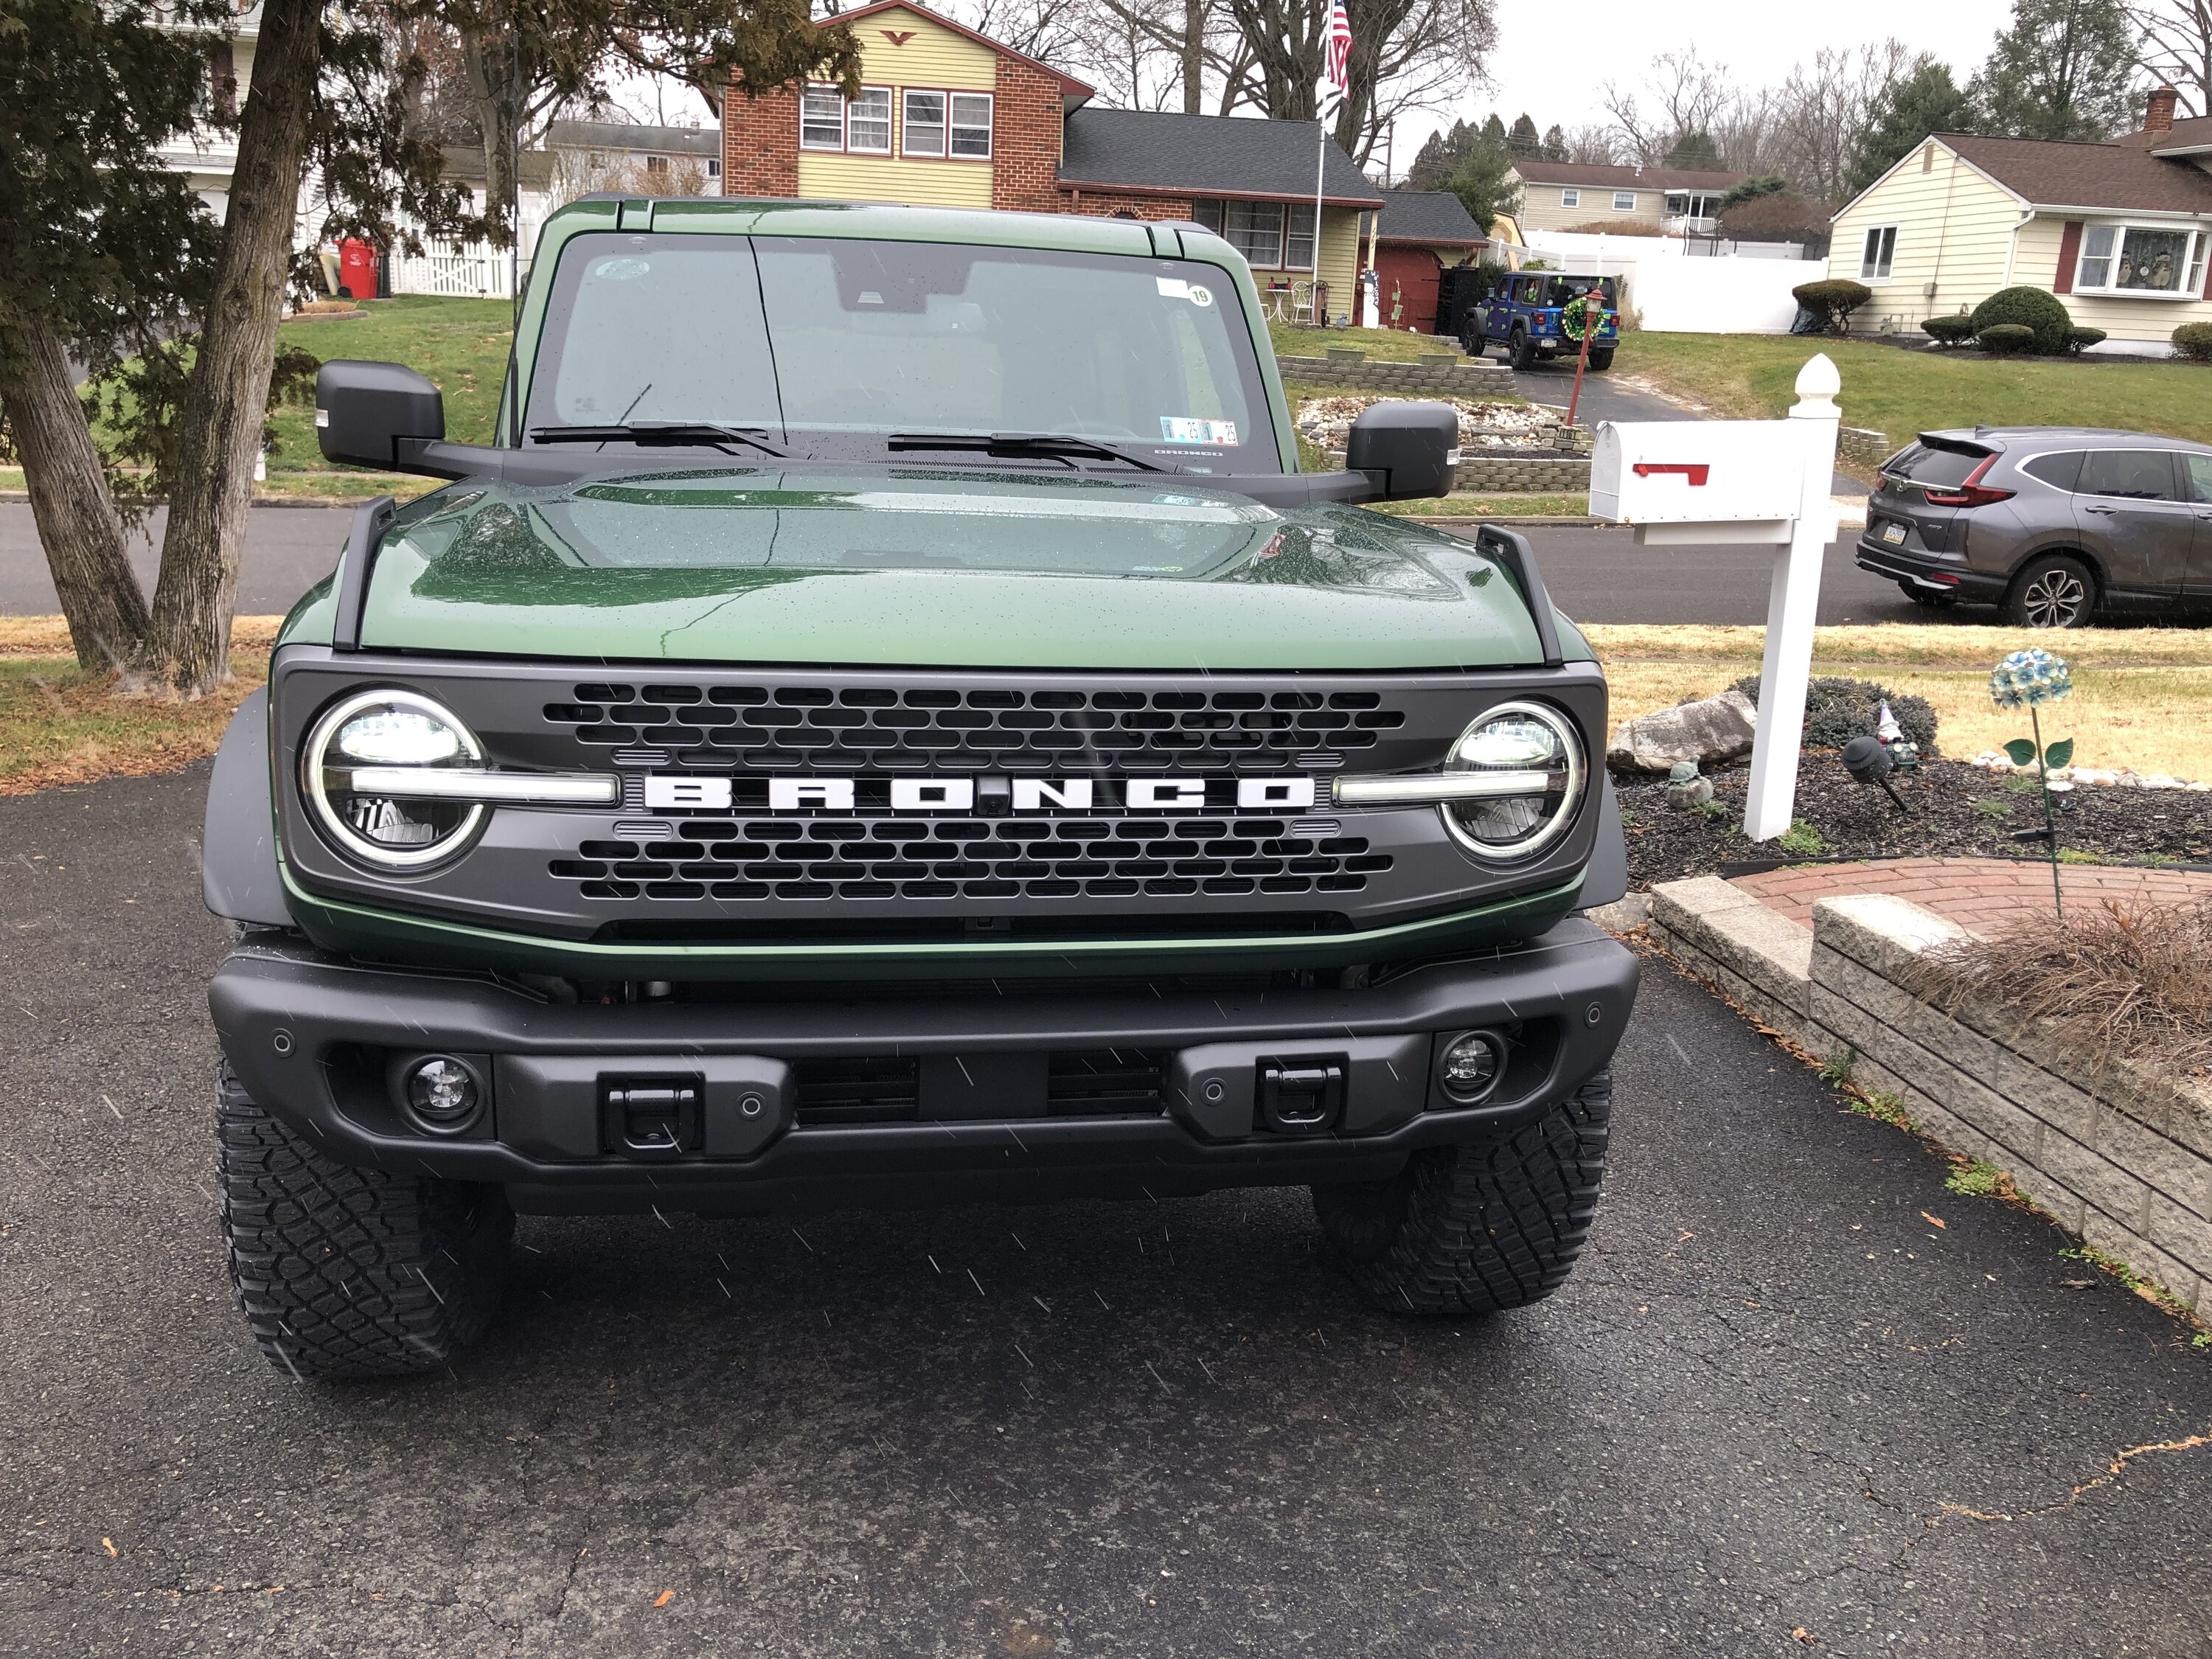 Ford Bronco Mean Green build… time will tell IMG_3725